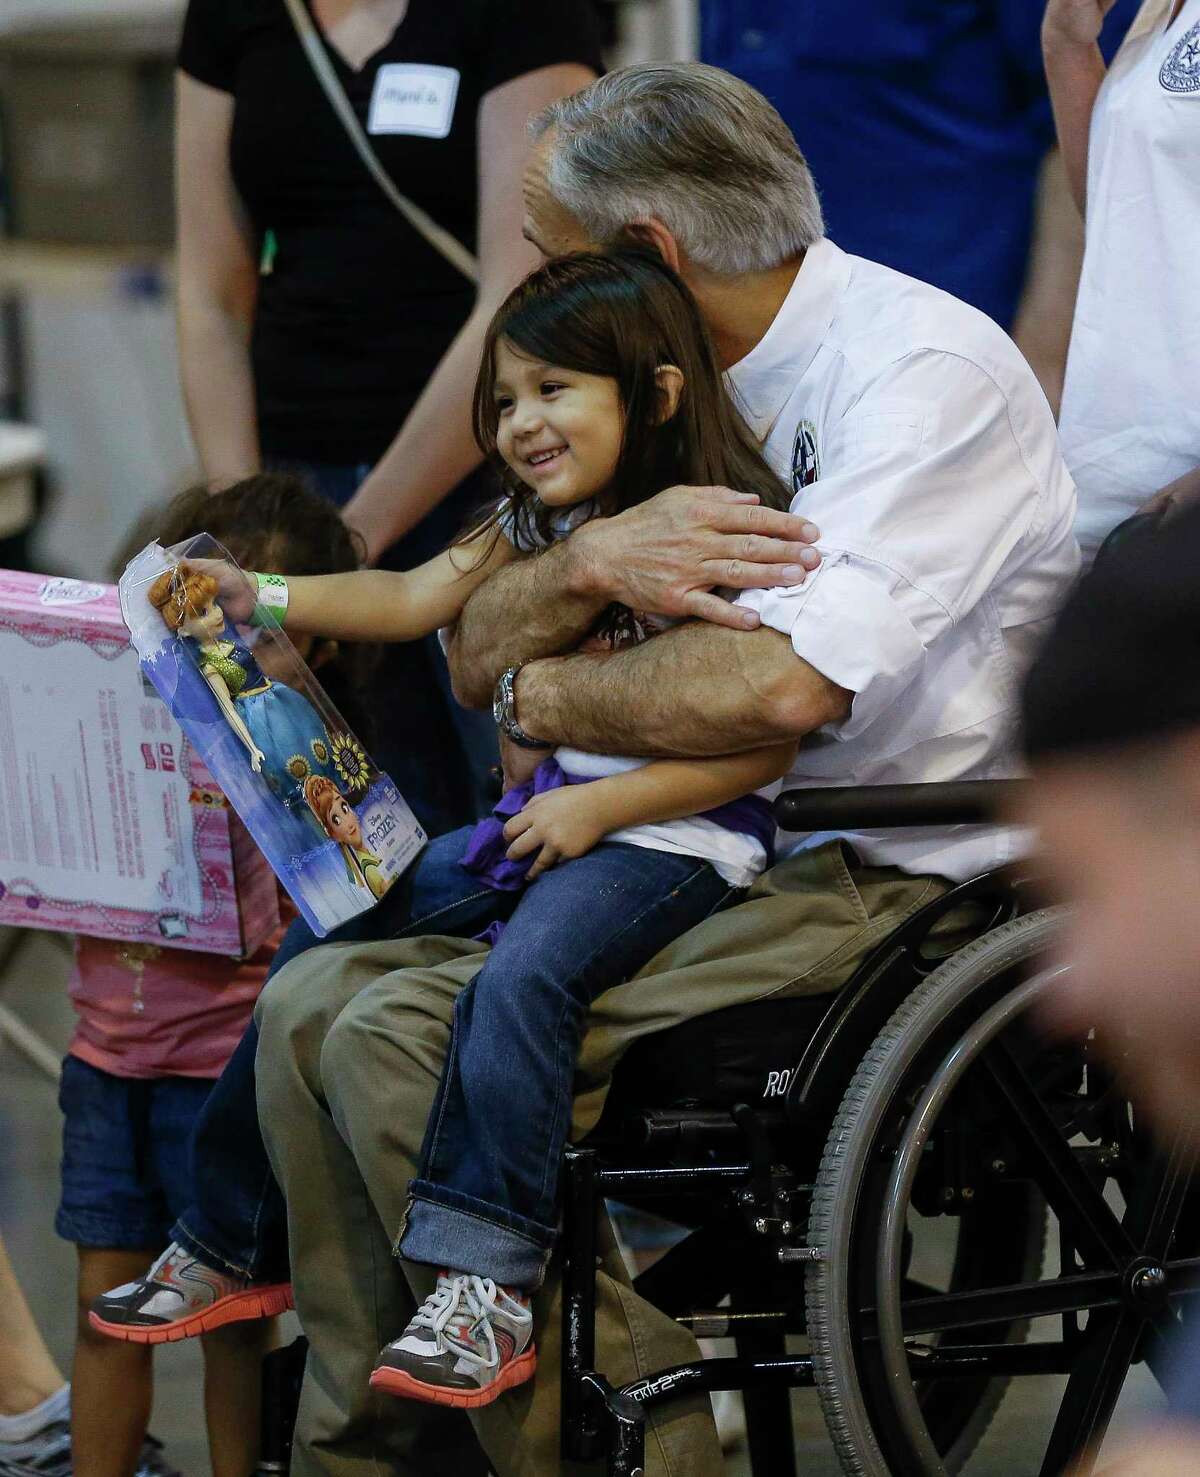 Texas Governor Greg Abbott hugs a child while visiting Tropical Storm Harvey evacuees at NRG Center in Houston Saturday, Sept. 2, 2017.